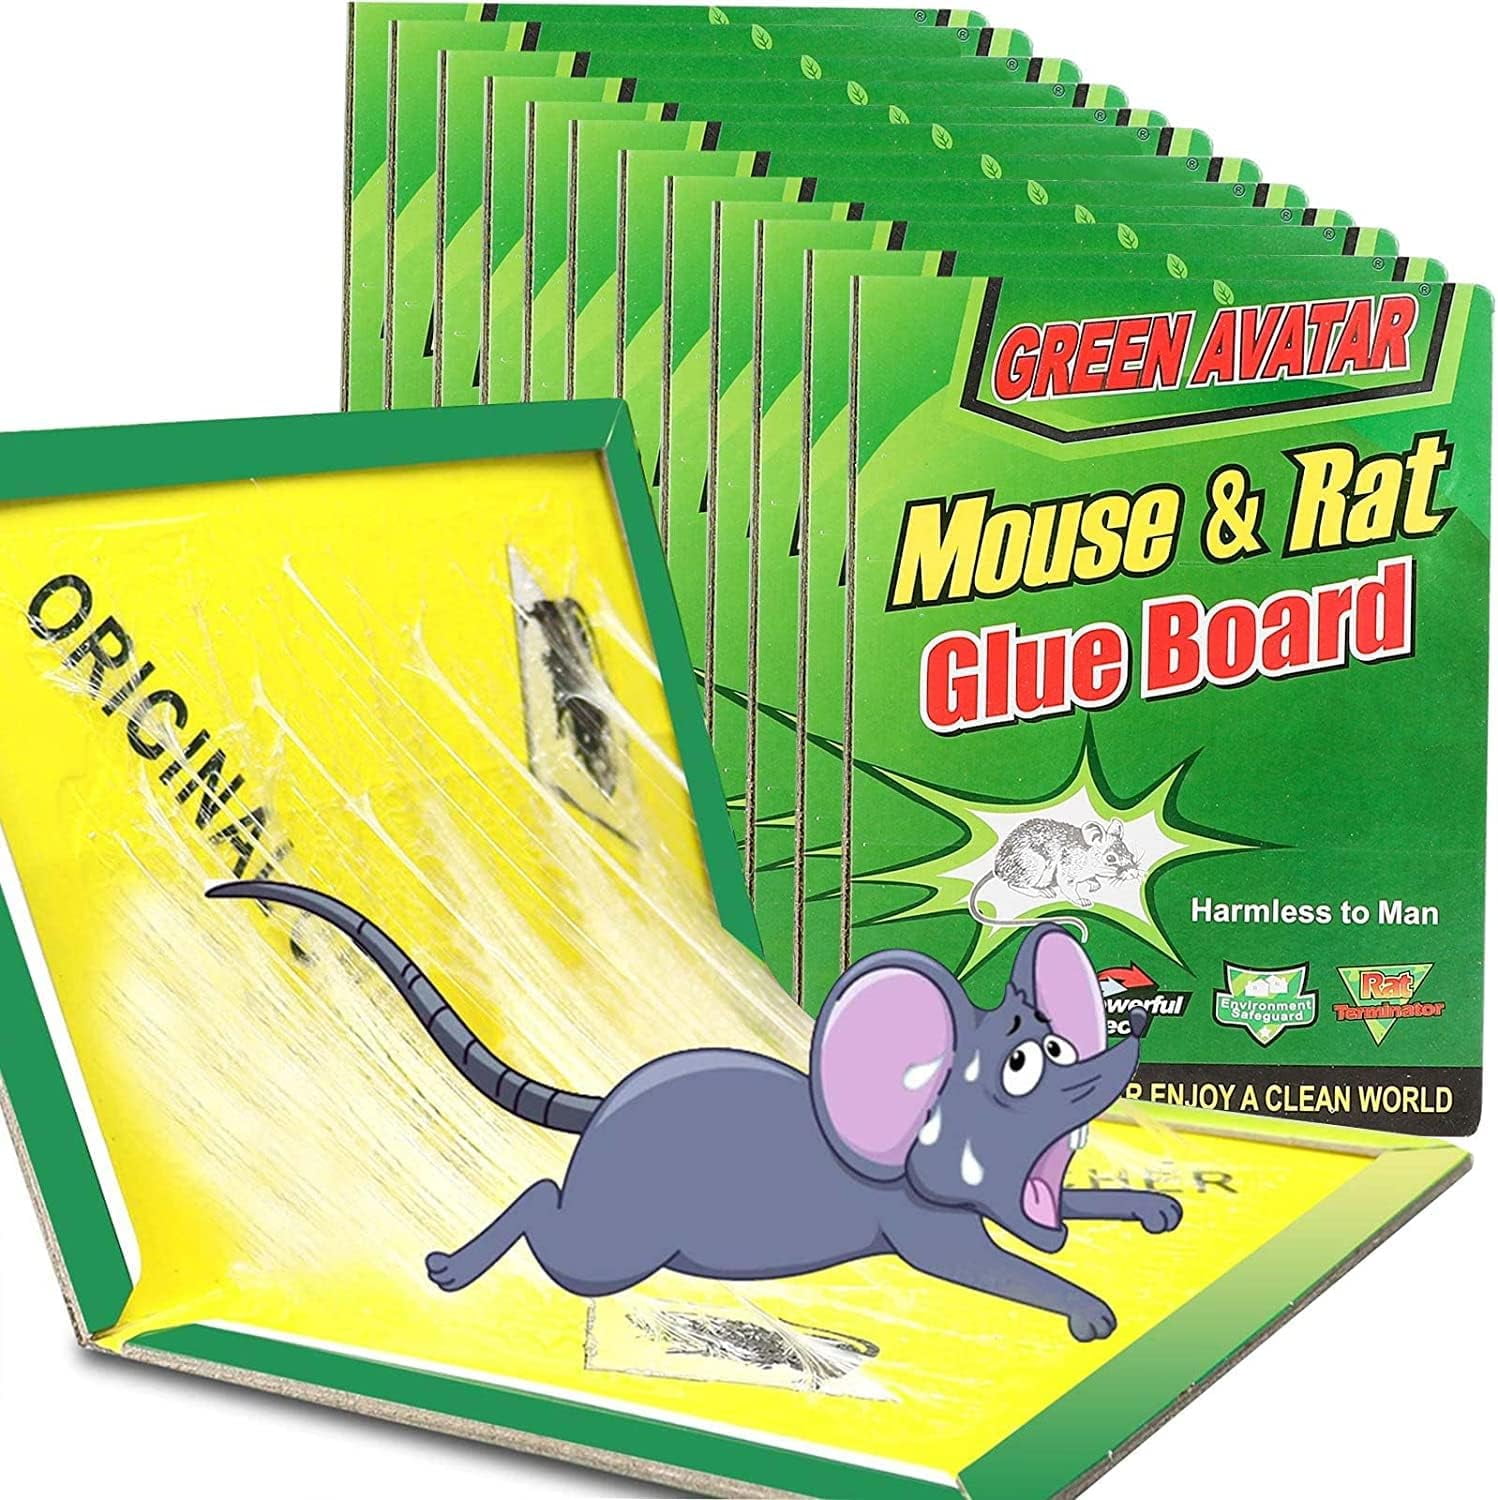 Setting a Mouse Trap, the Best Mouse Trap, Humane Mouse Traps, Glue  Mouse Traps